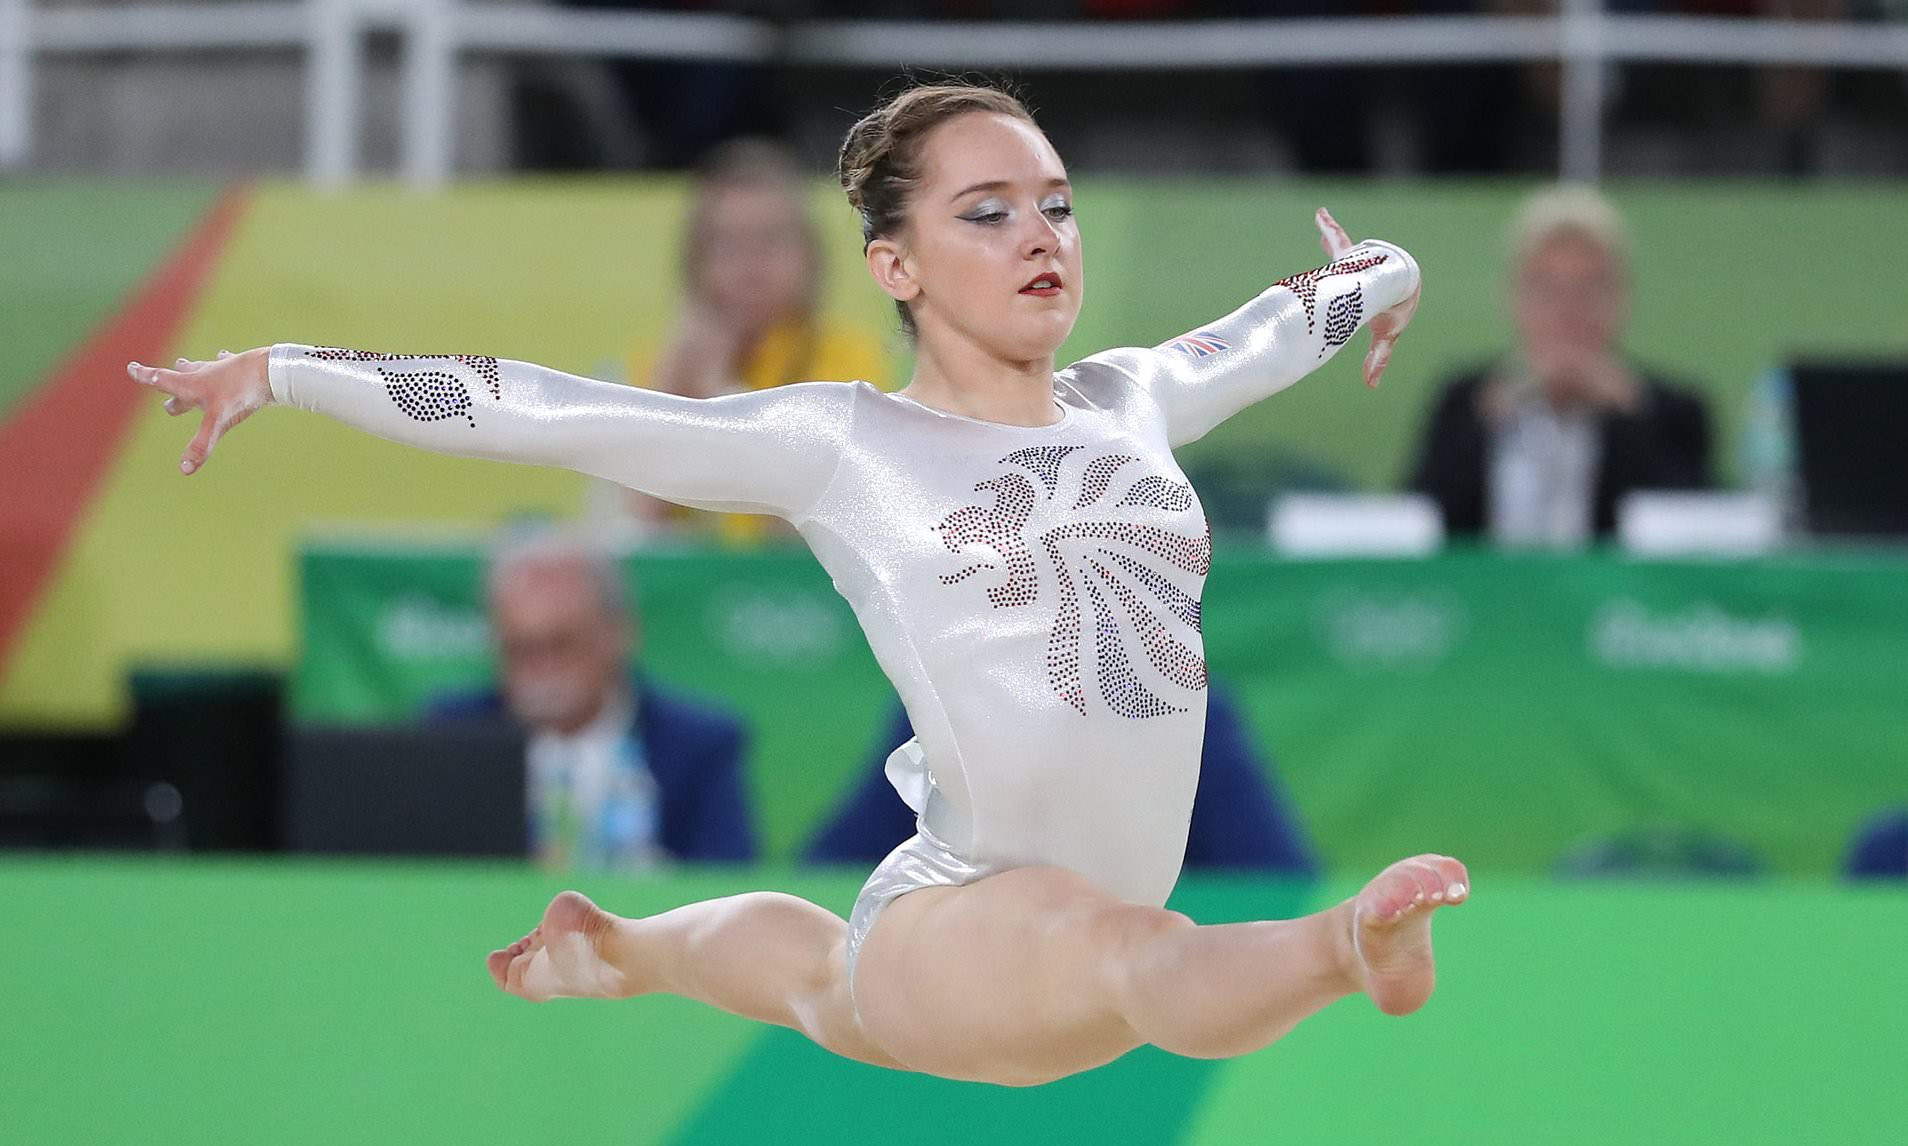 Gymnastics in one of several sports in Britain that have been linked to allegations of bullying and harassment ©Getty Images